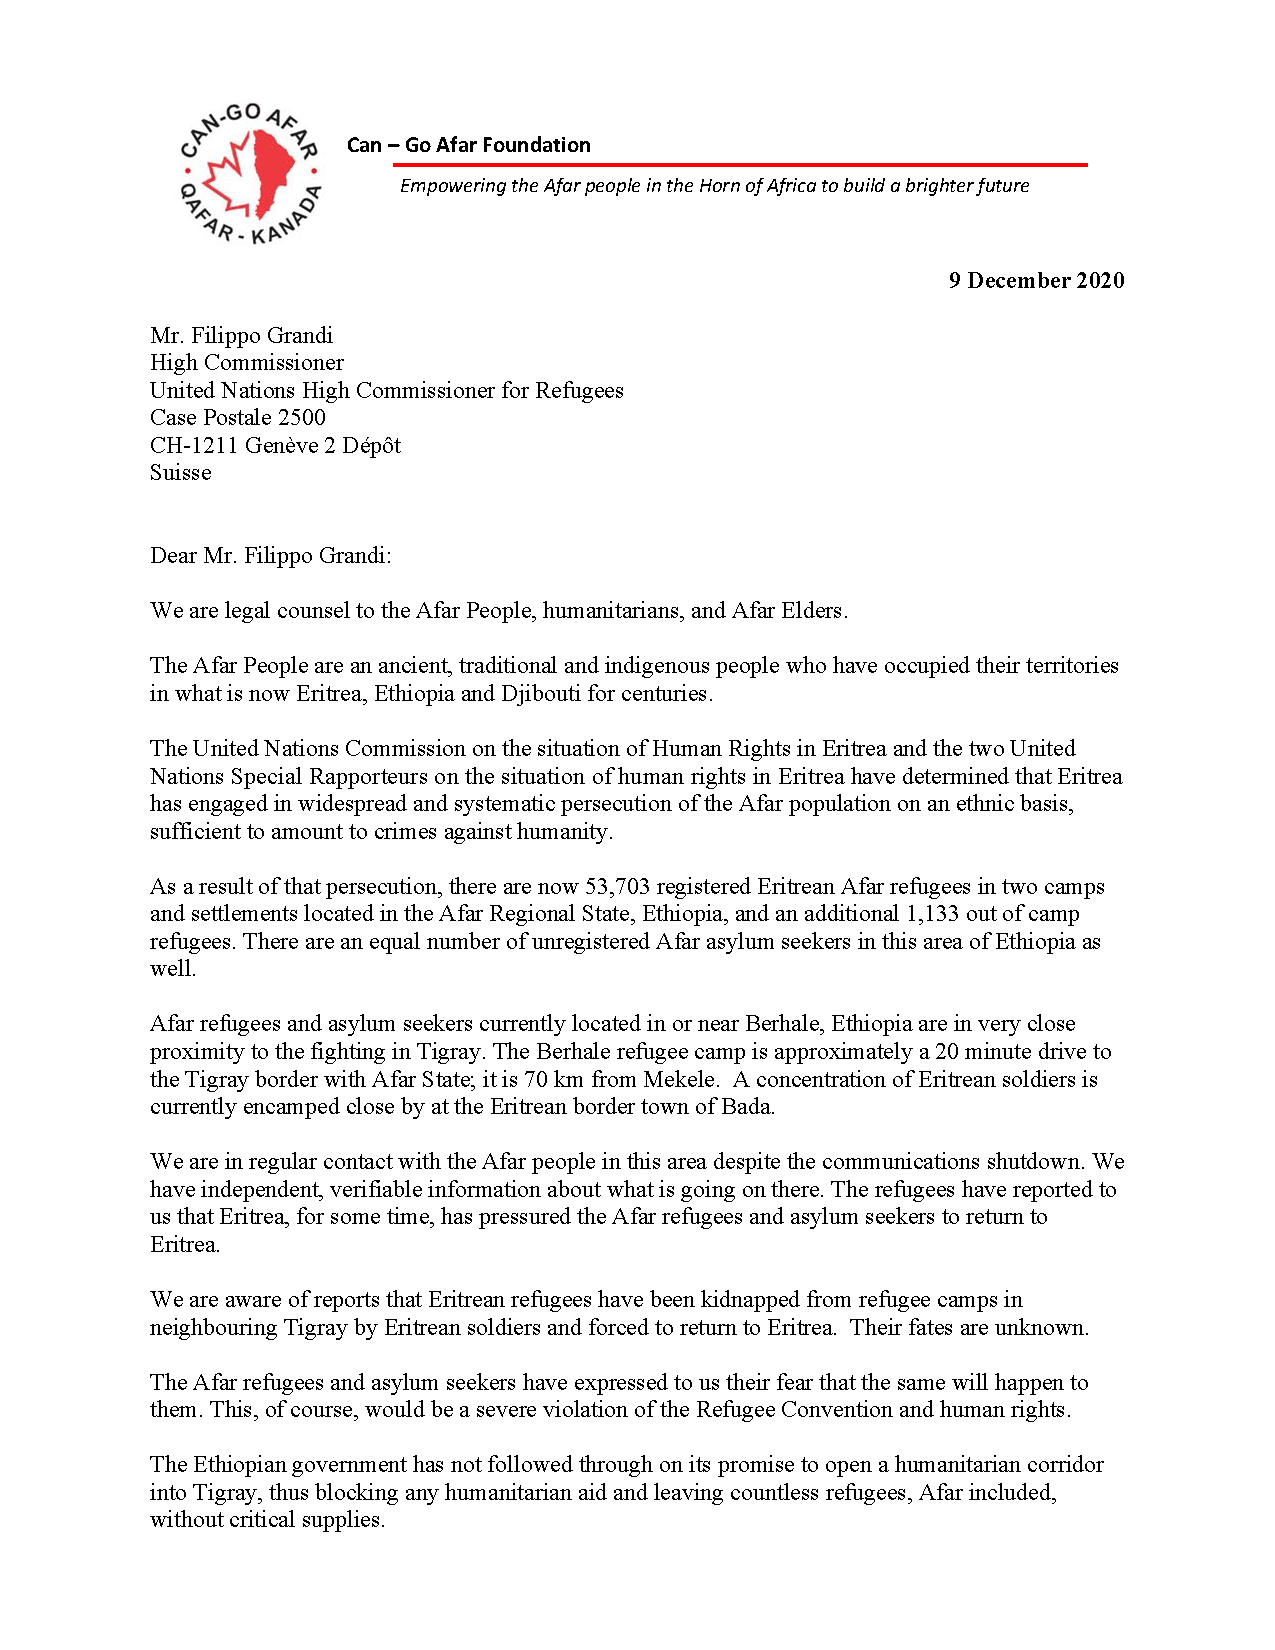 Letter to UNHCR - 9 December 2020 - First page